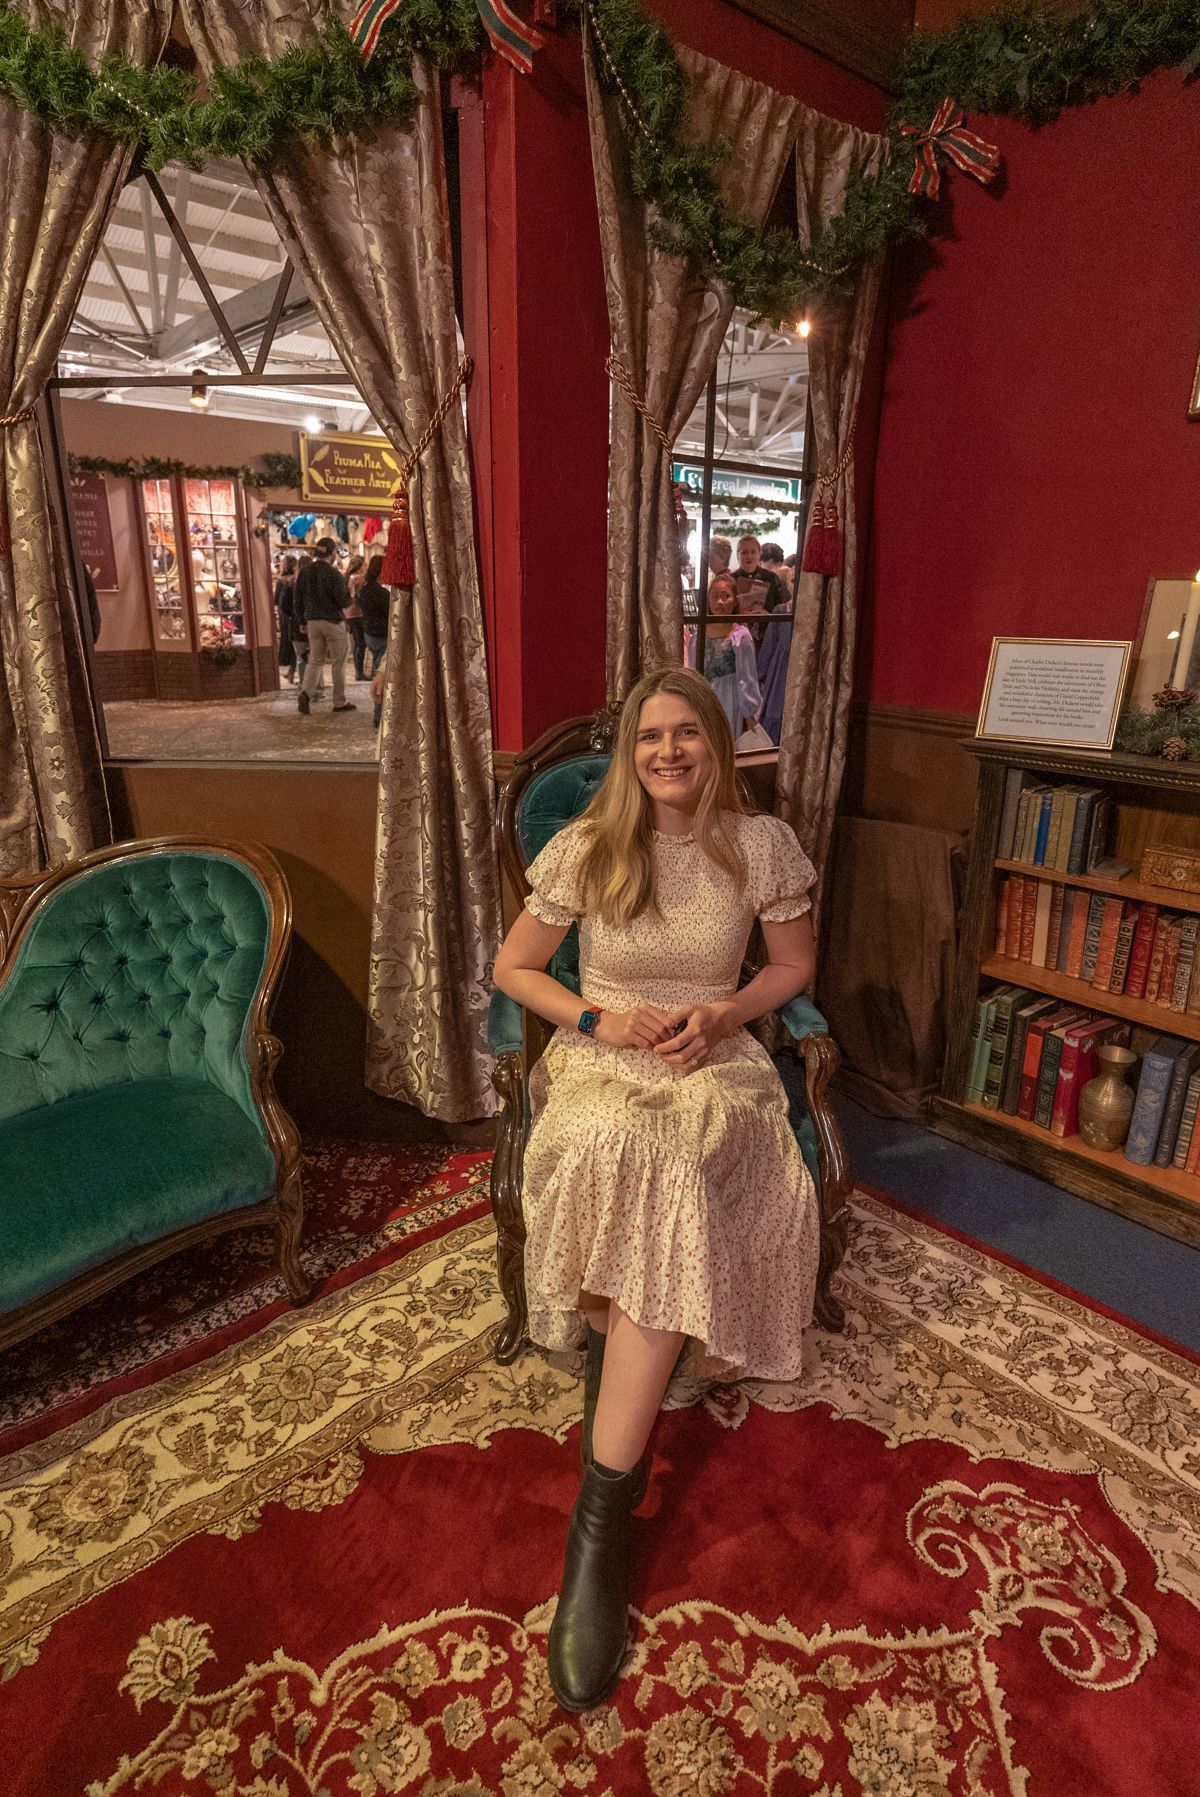 A woman in a white dress sits in an armchair in a red room decorated like a Victorian interior next to a green velvet couch and a bookshelf.